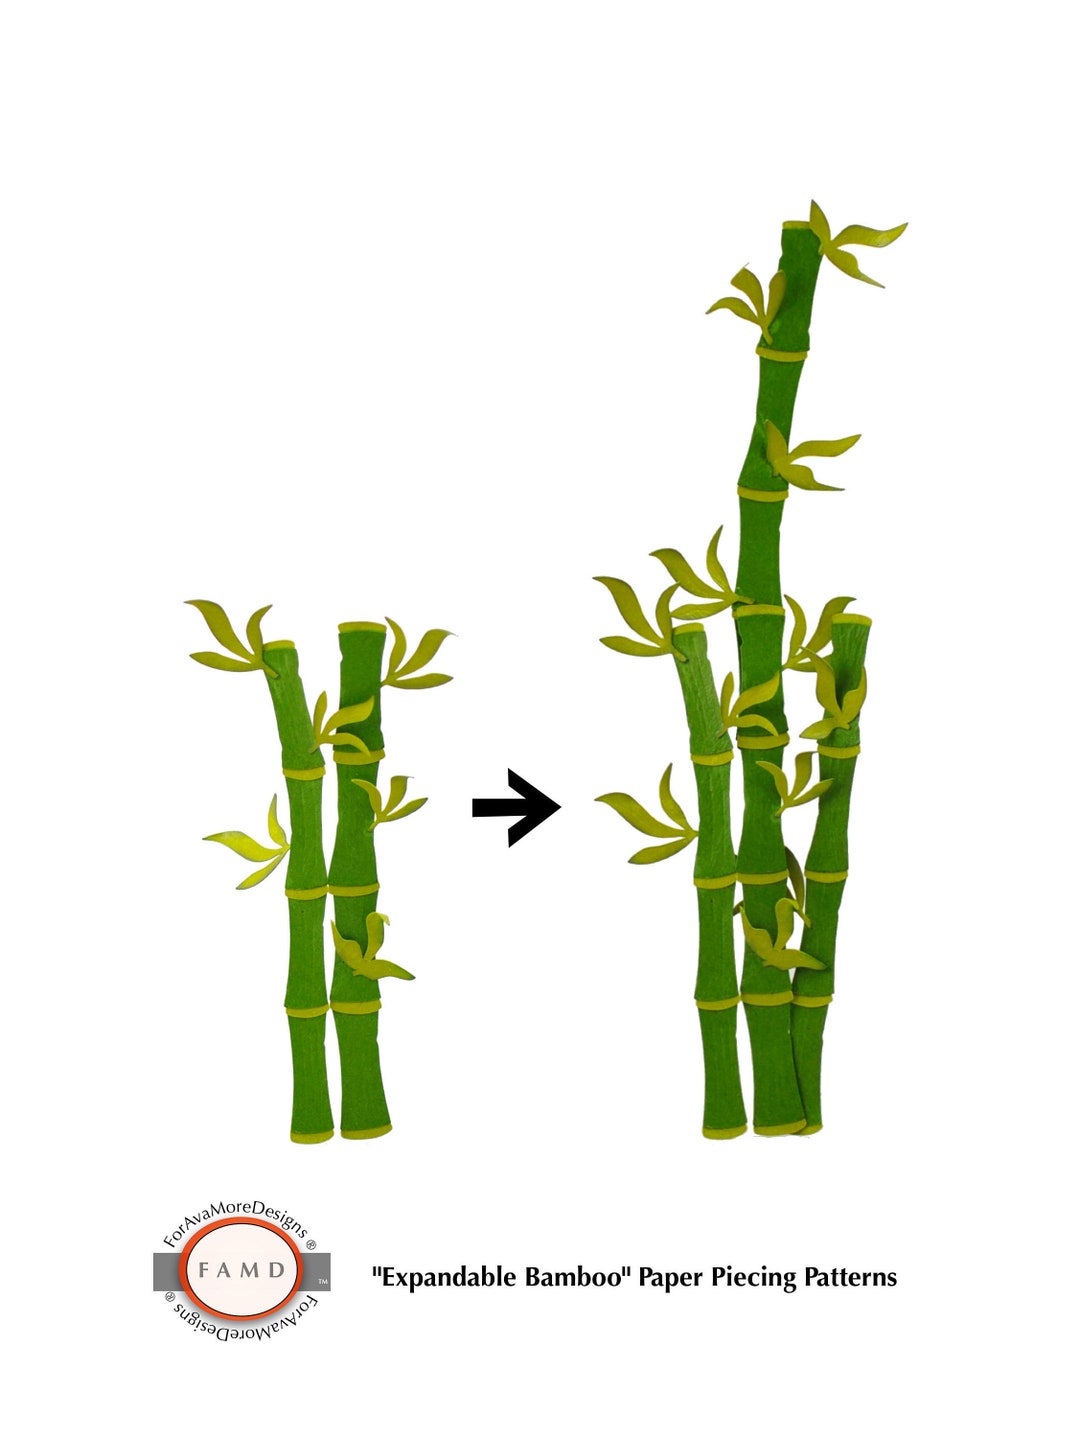 Bamboo Plant Lucky Bamboo SVG Paper Piecing Patterns for Card - Etsy